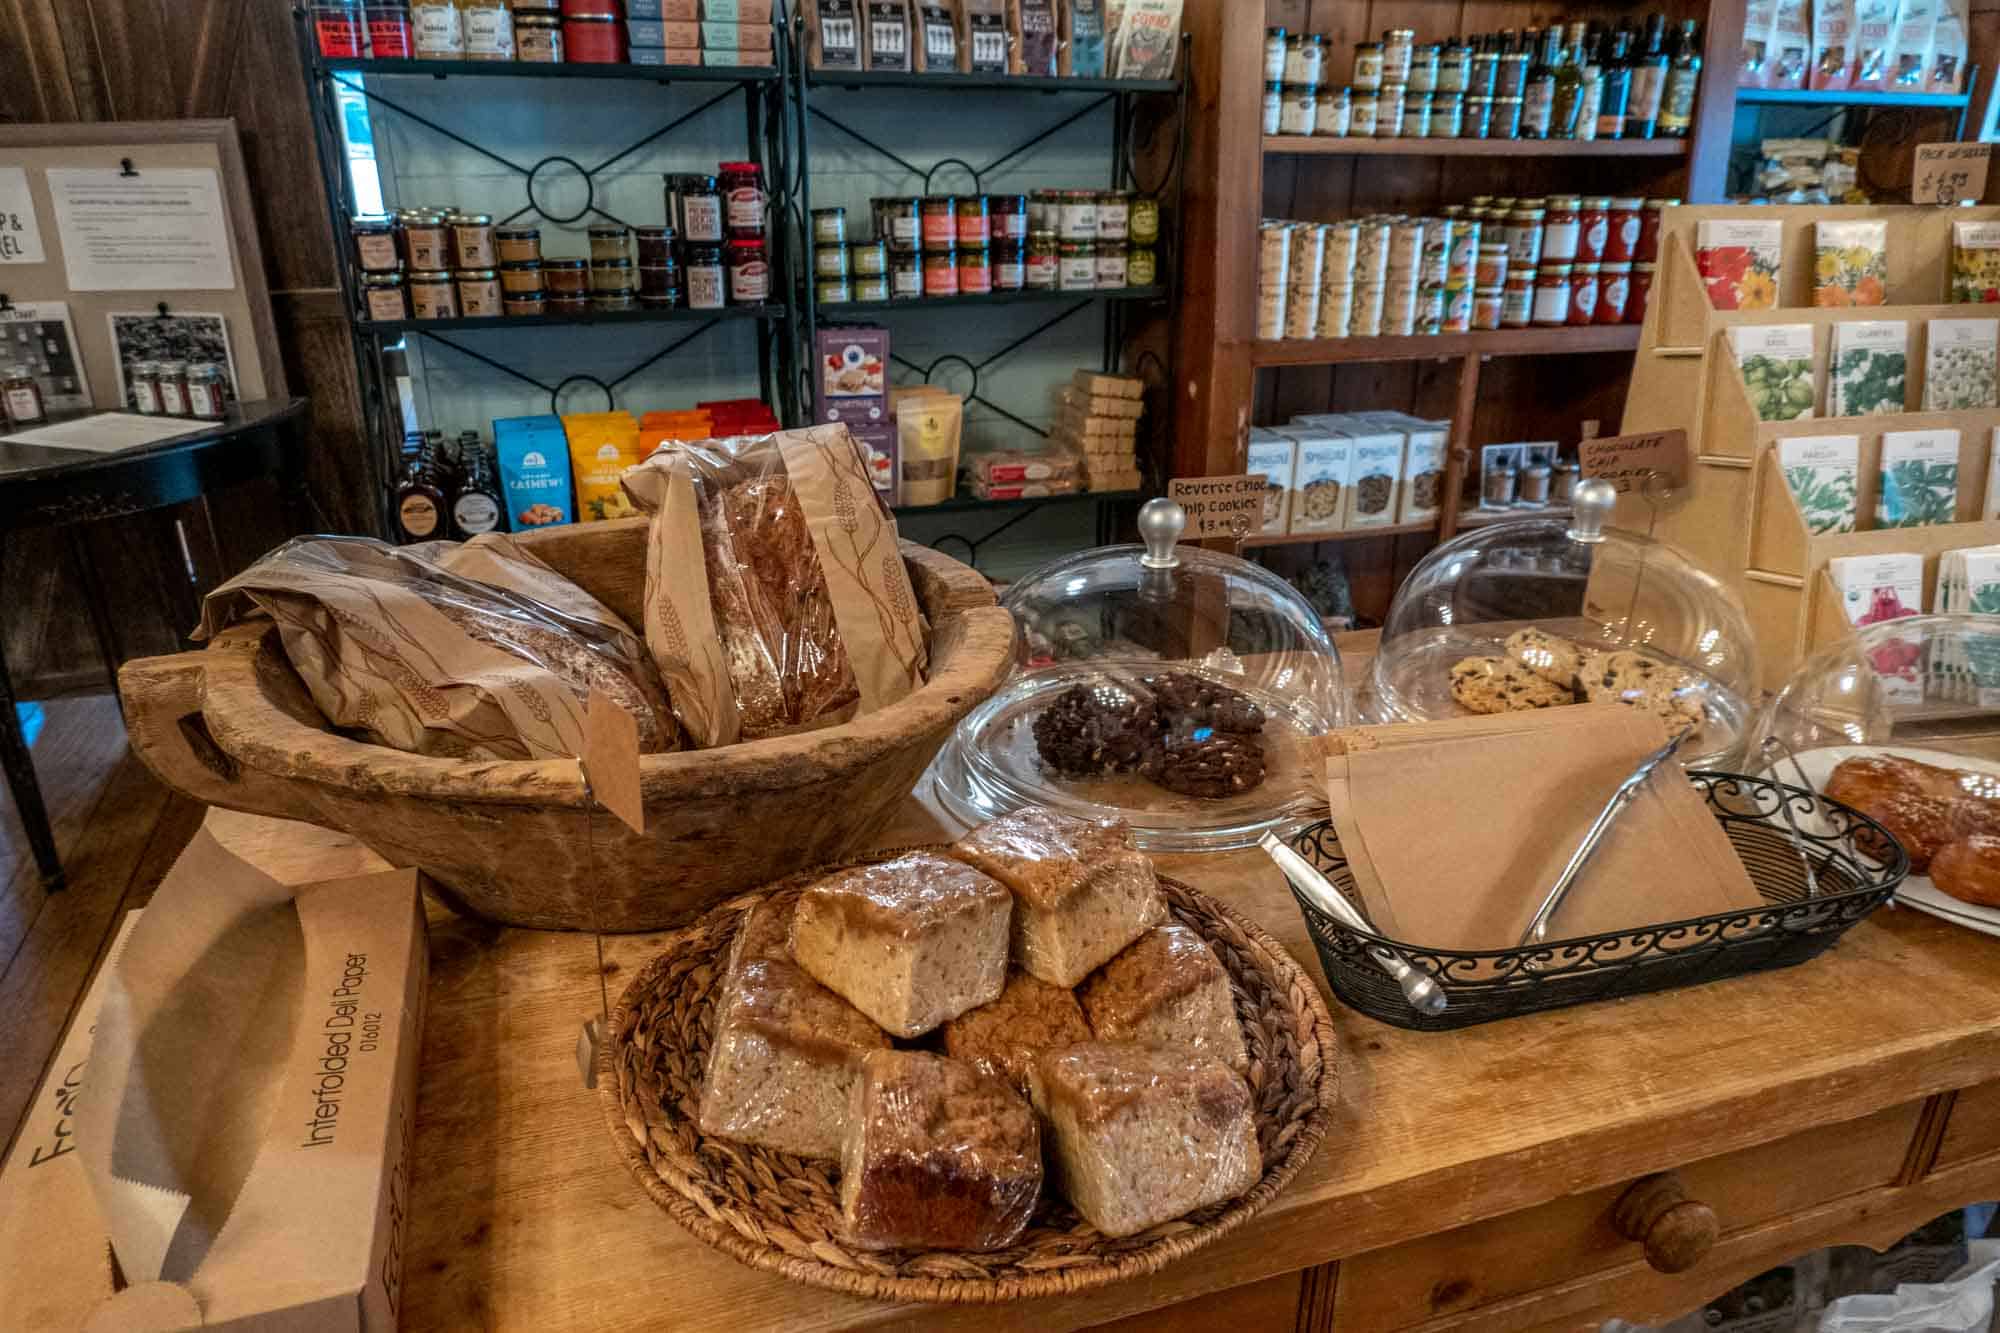 Bread and pastries in vegan market